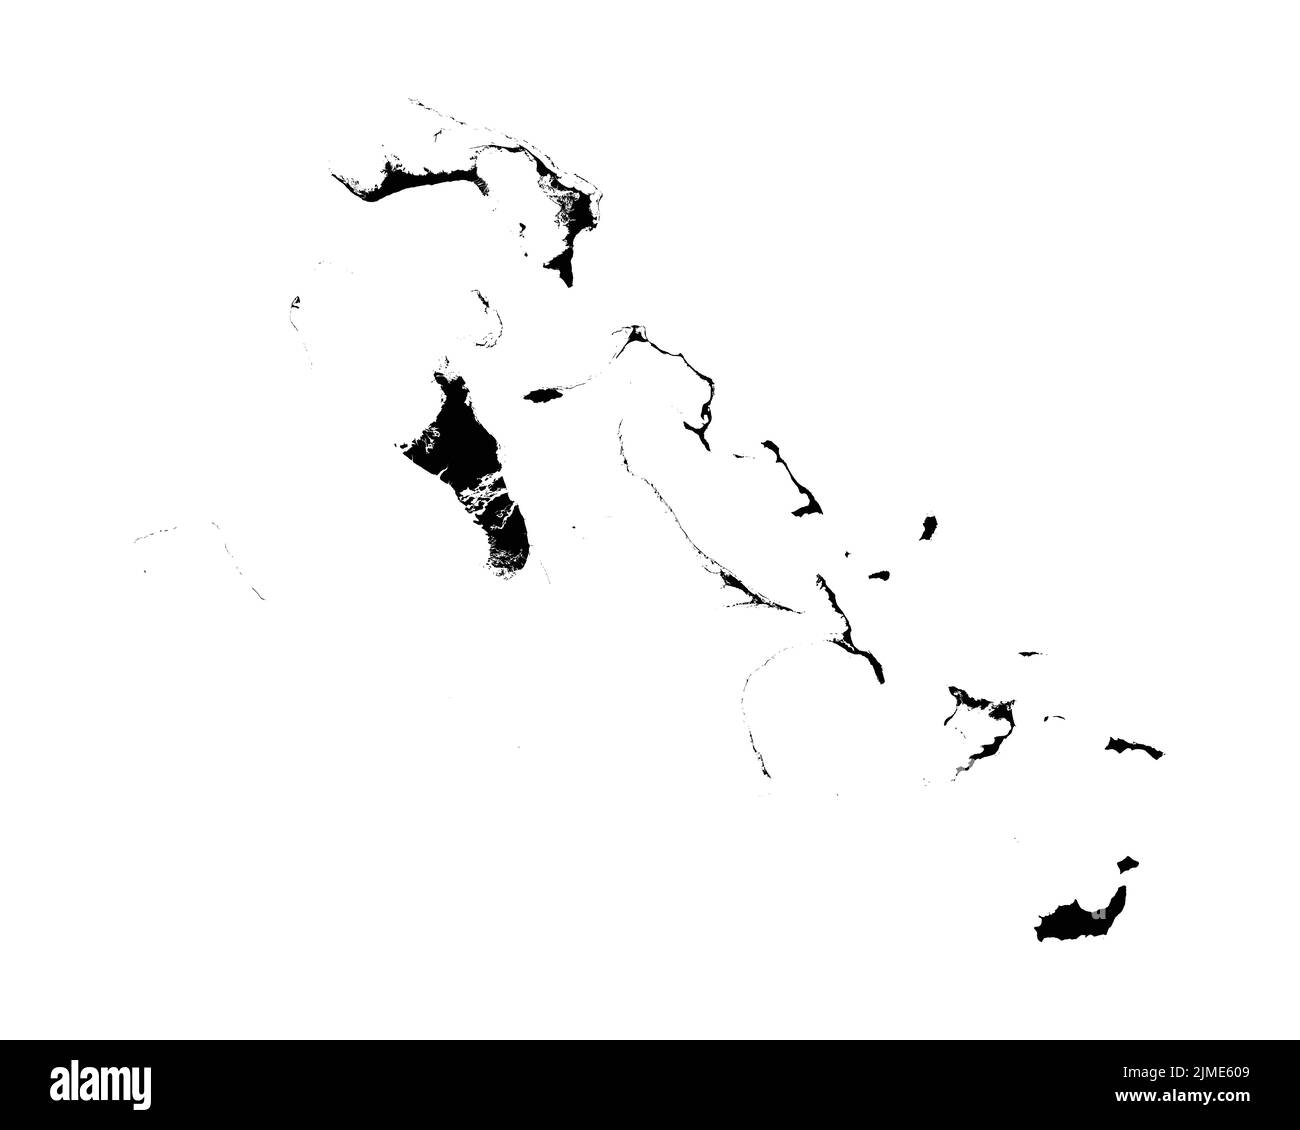 The Bahamas Map. Bahamian Country Map. Black and White National Outline Border Boundary Shape Geography Territory EPS Vector Illustration Clipart Stock Vector